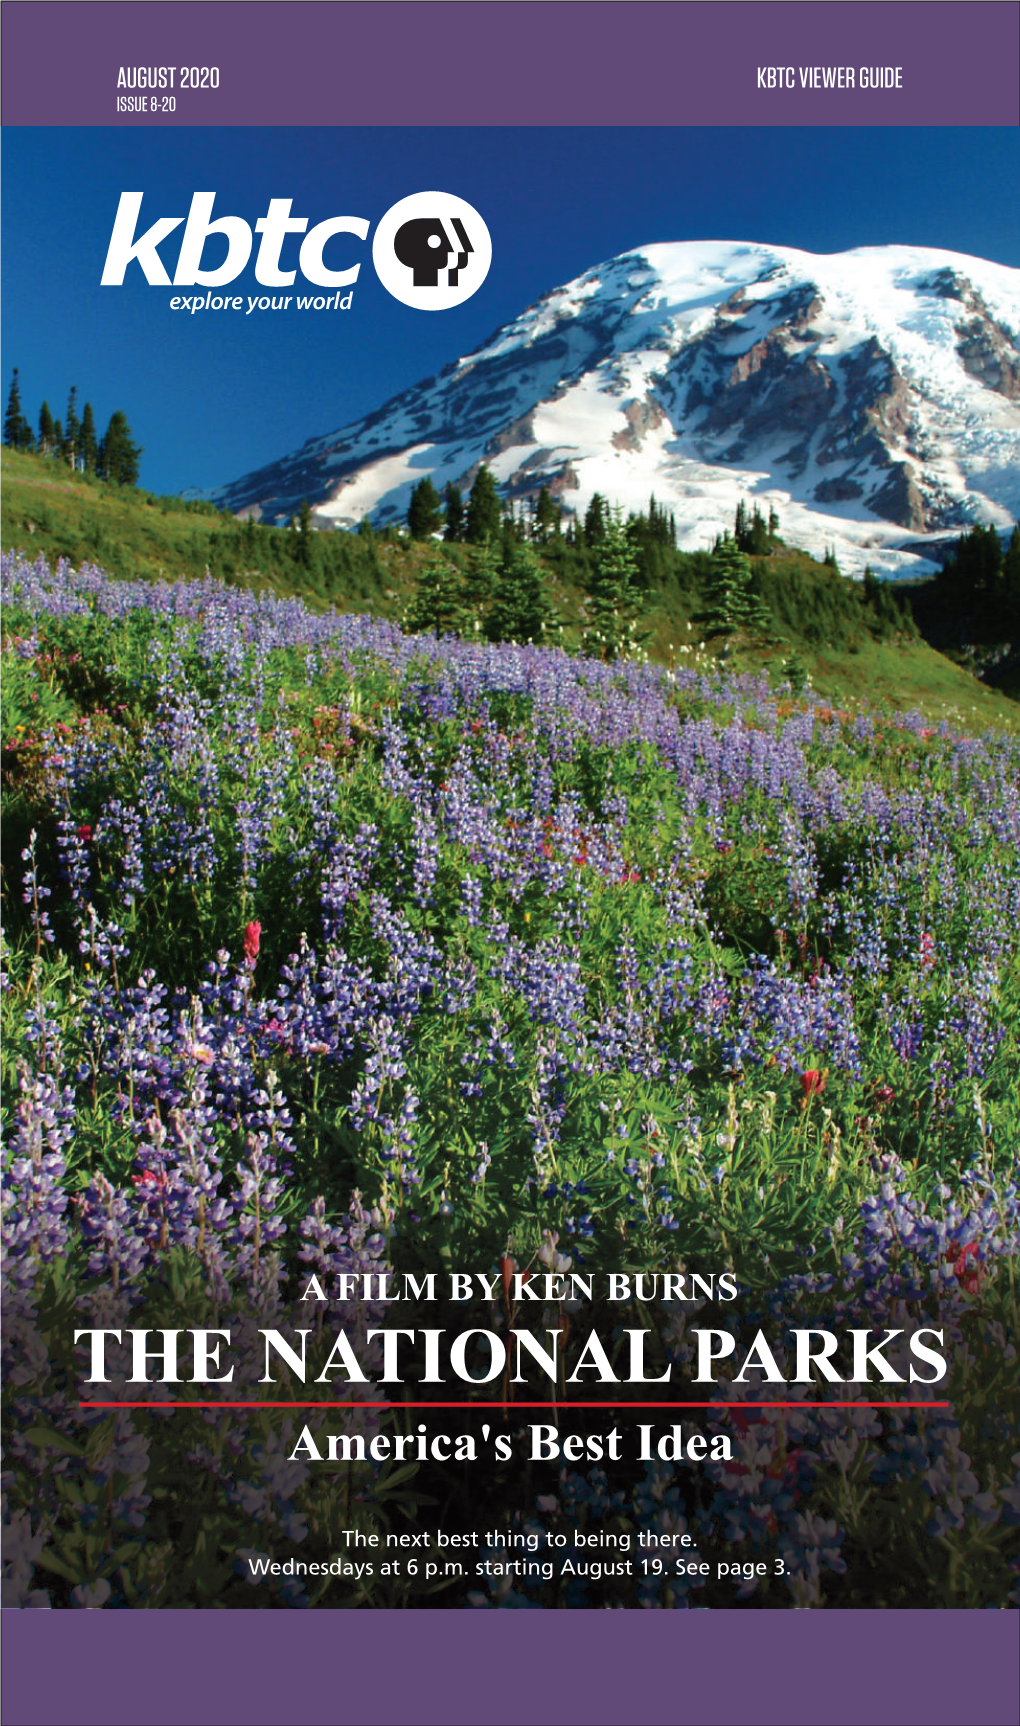 THE NATIONAL PARKS America's Best Idea